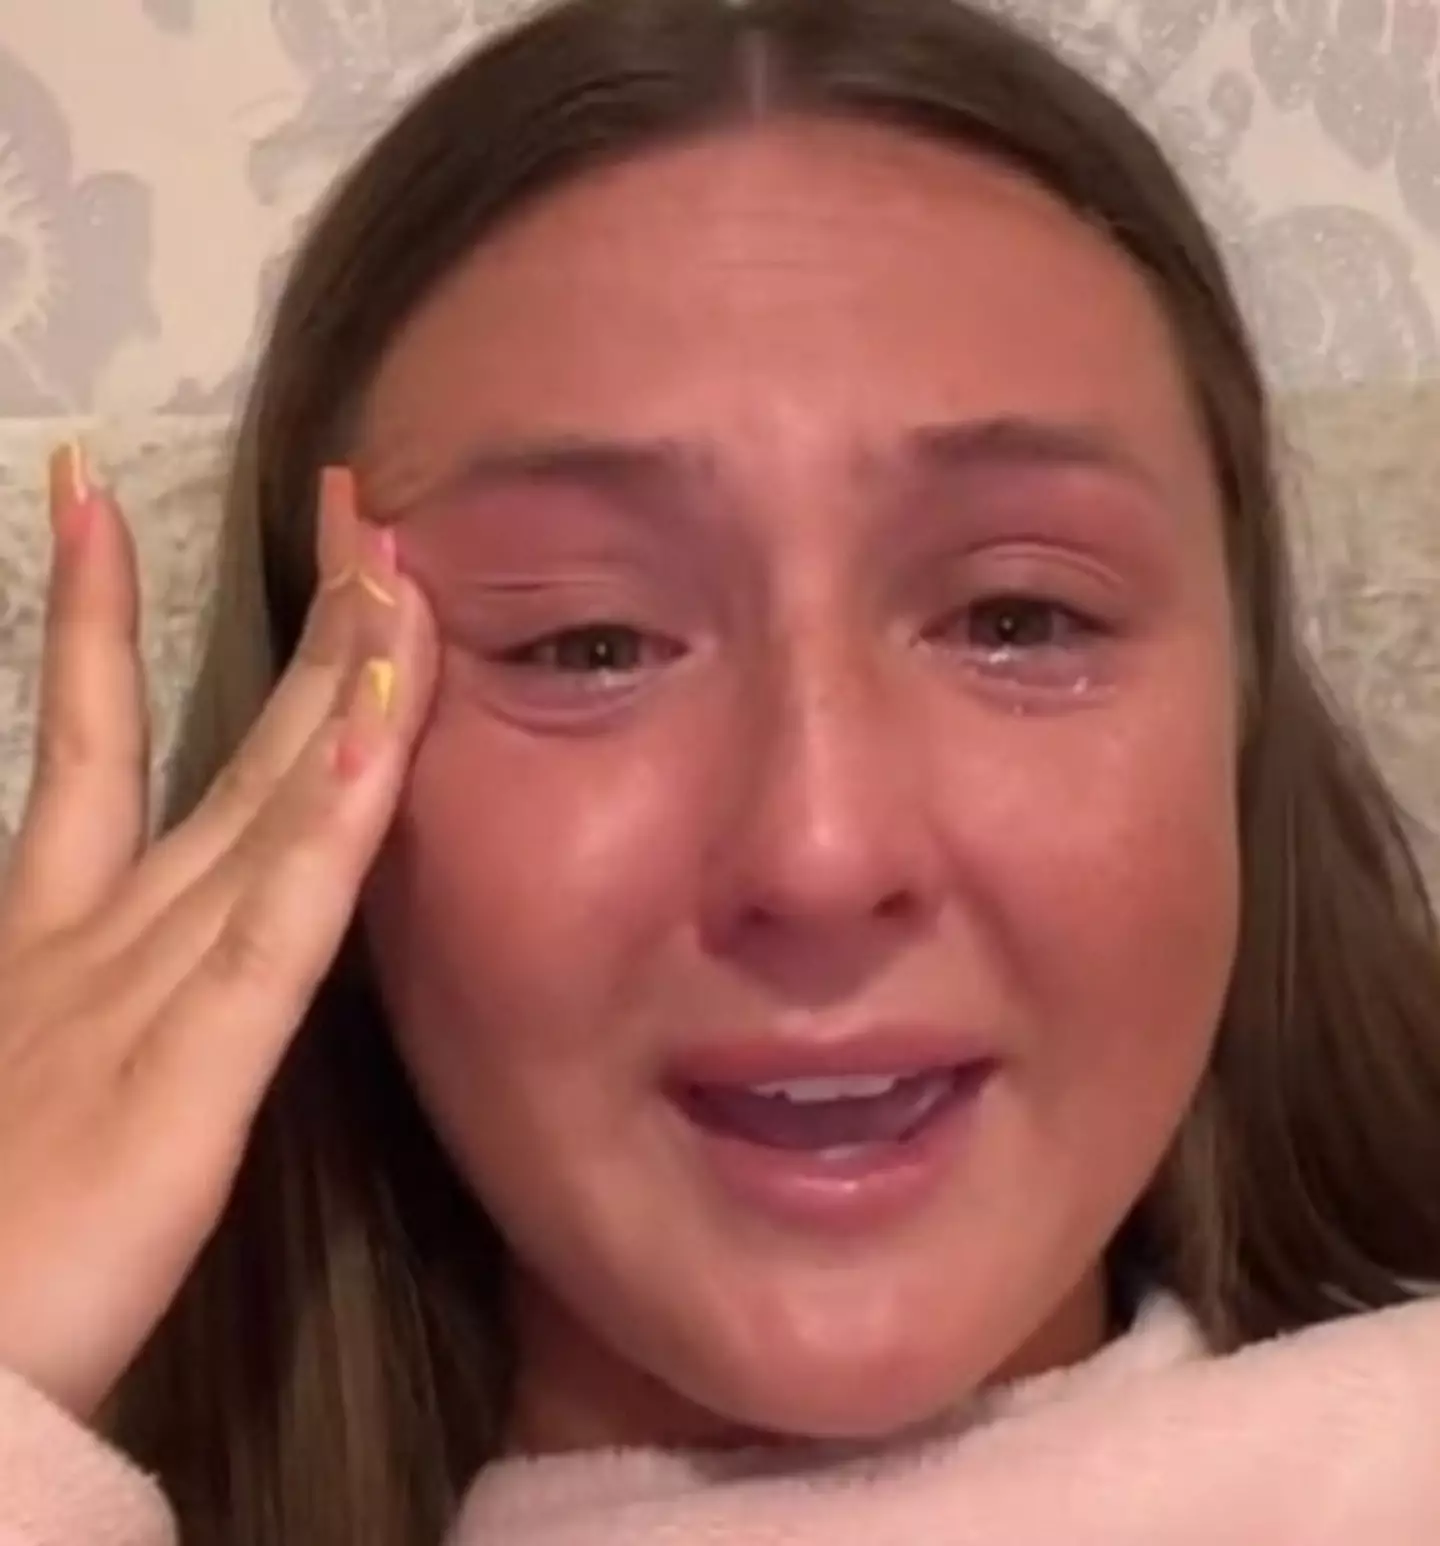 Katylee explained herself to her critics in a teary video.